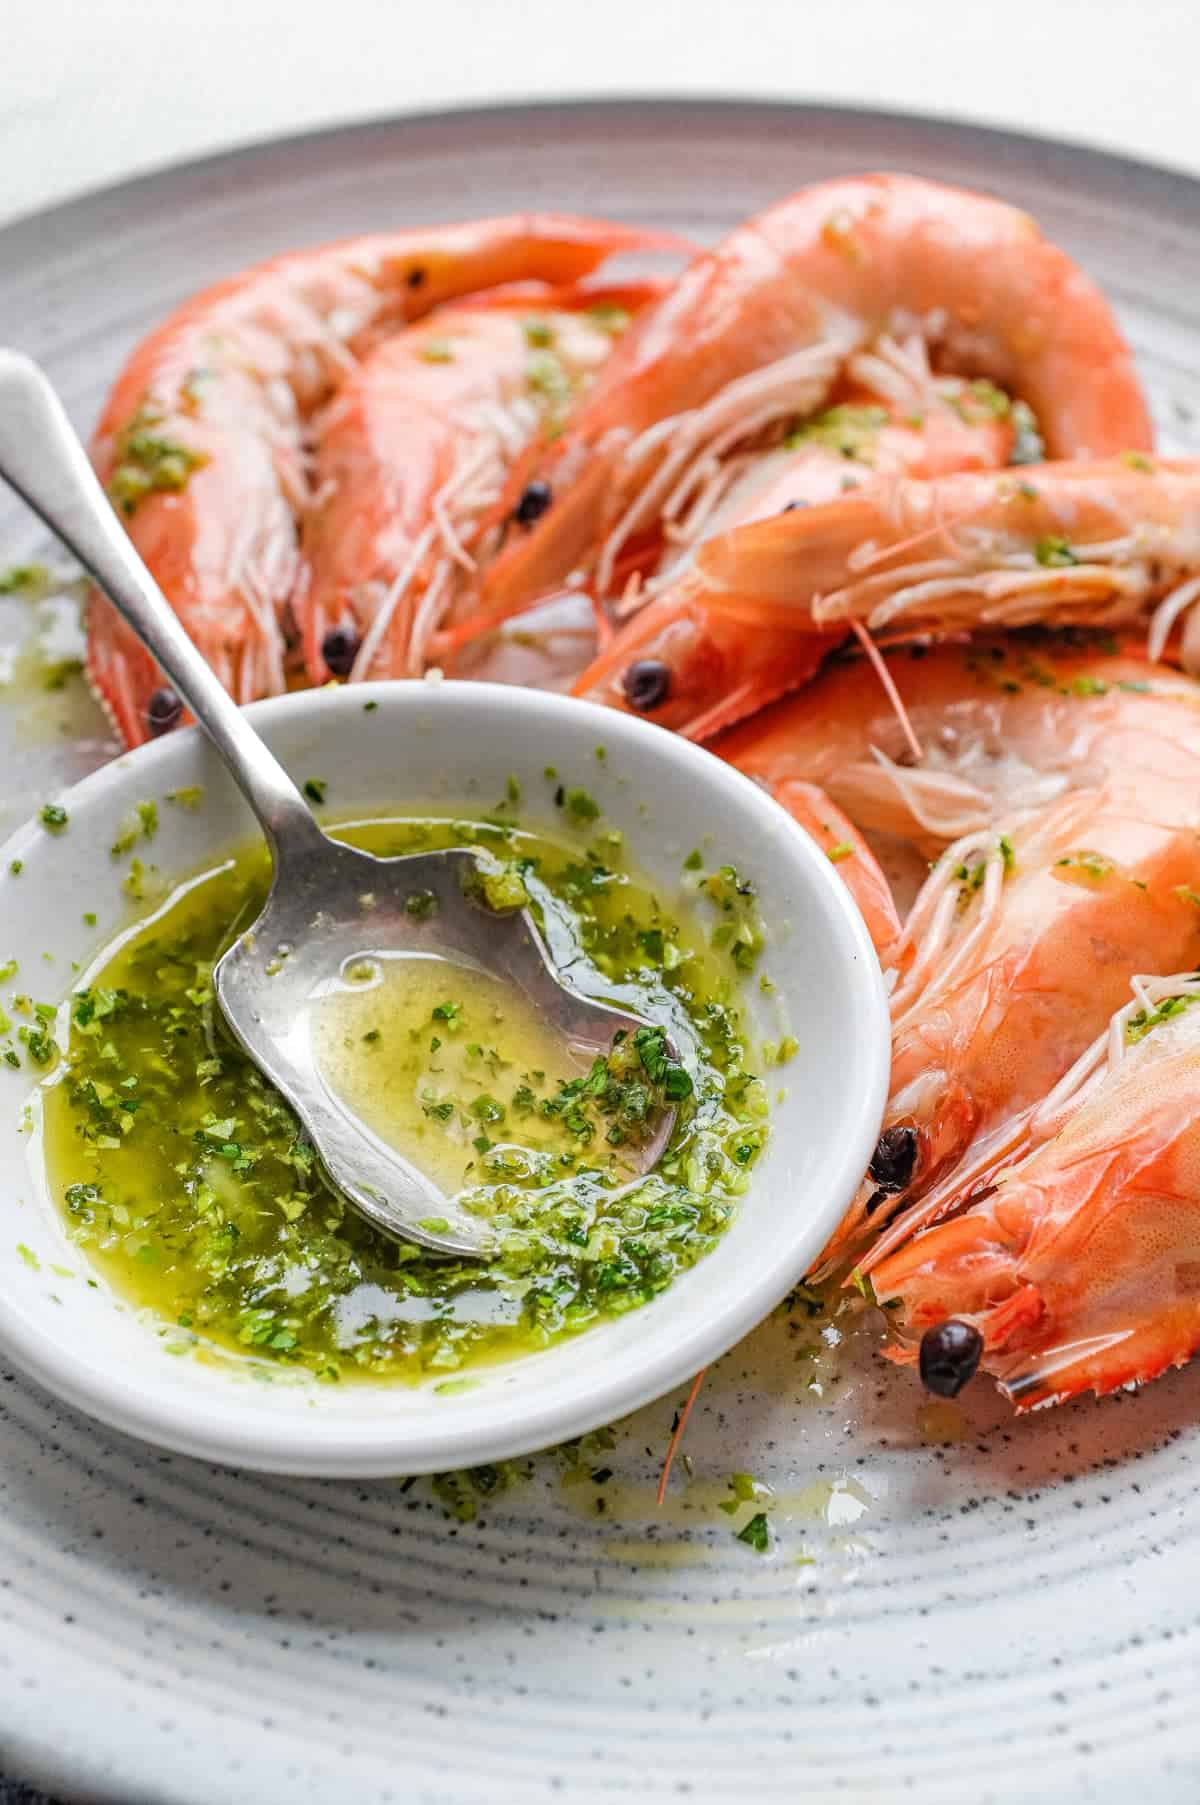 A platter of King Prawns with a small bowl of Italian Salmoriglio sauce, a herb and lemon dressing. A small spoon sits in the bowl.